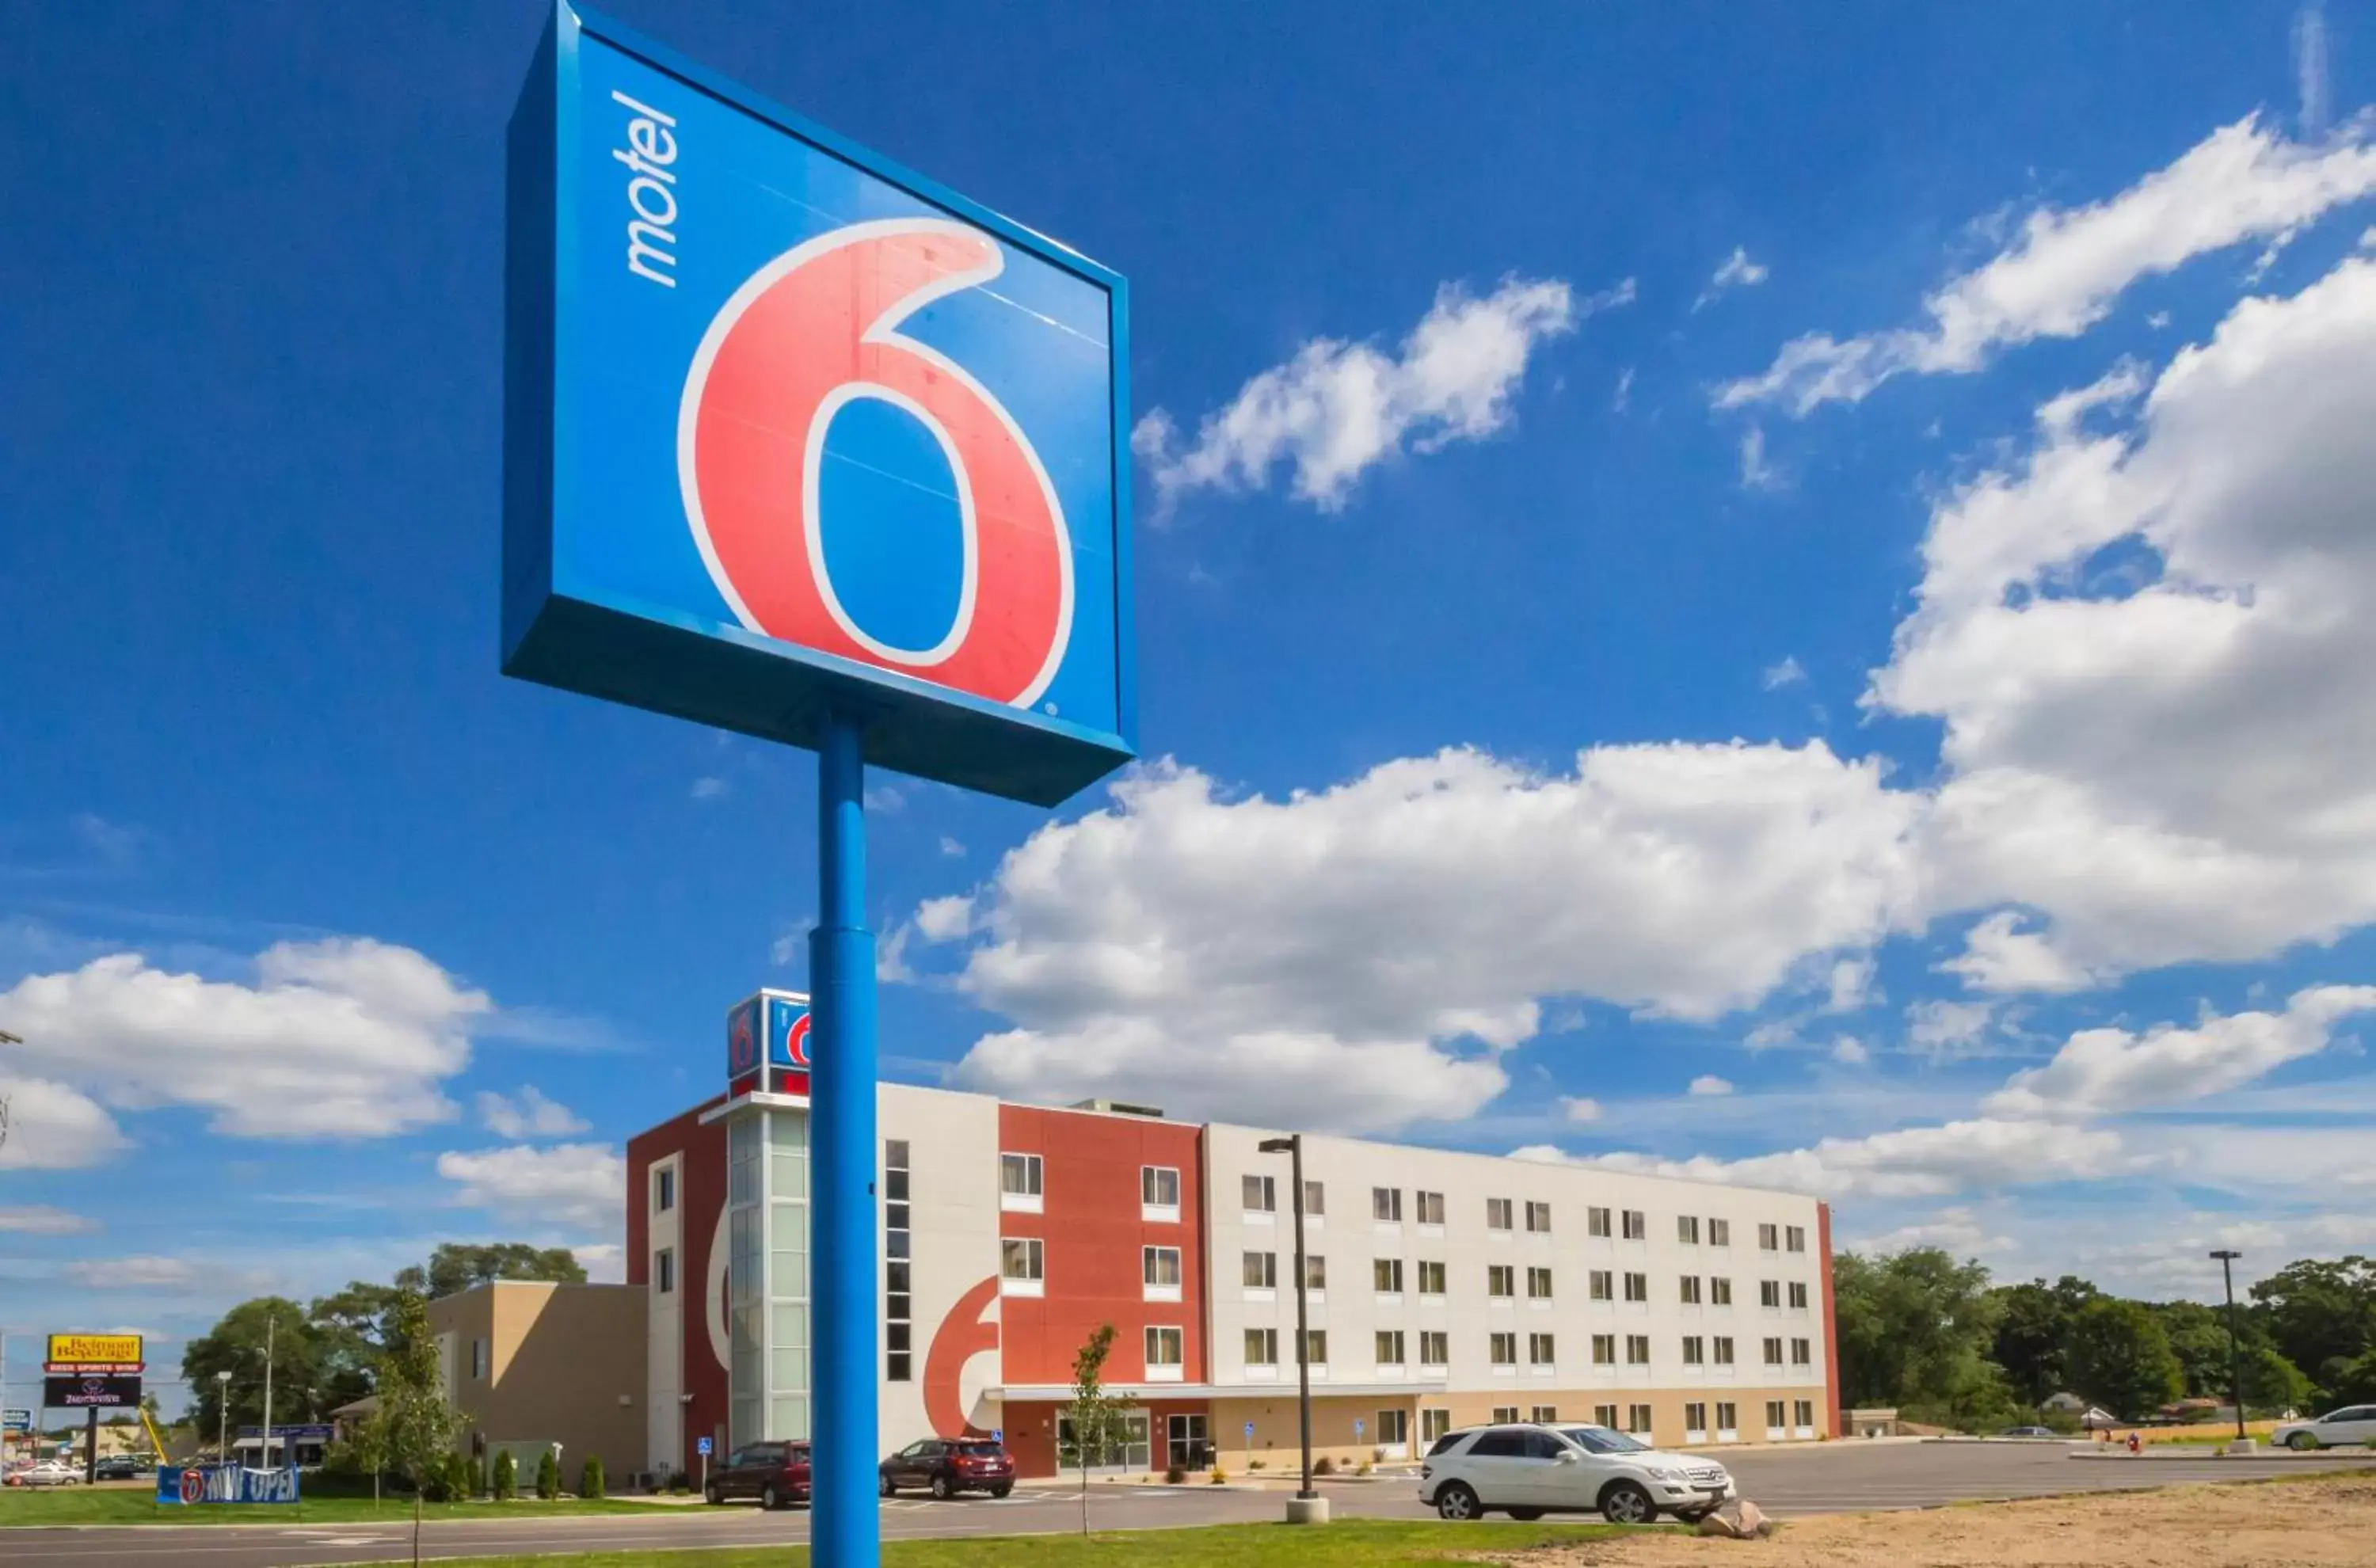 Property logo or sign, Property Building in Motel 6-South Bend, IN - Mishawaka